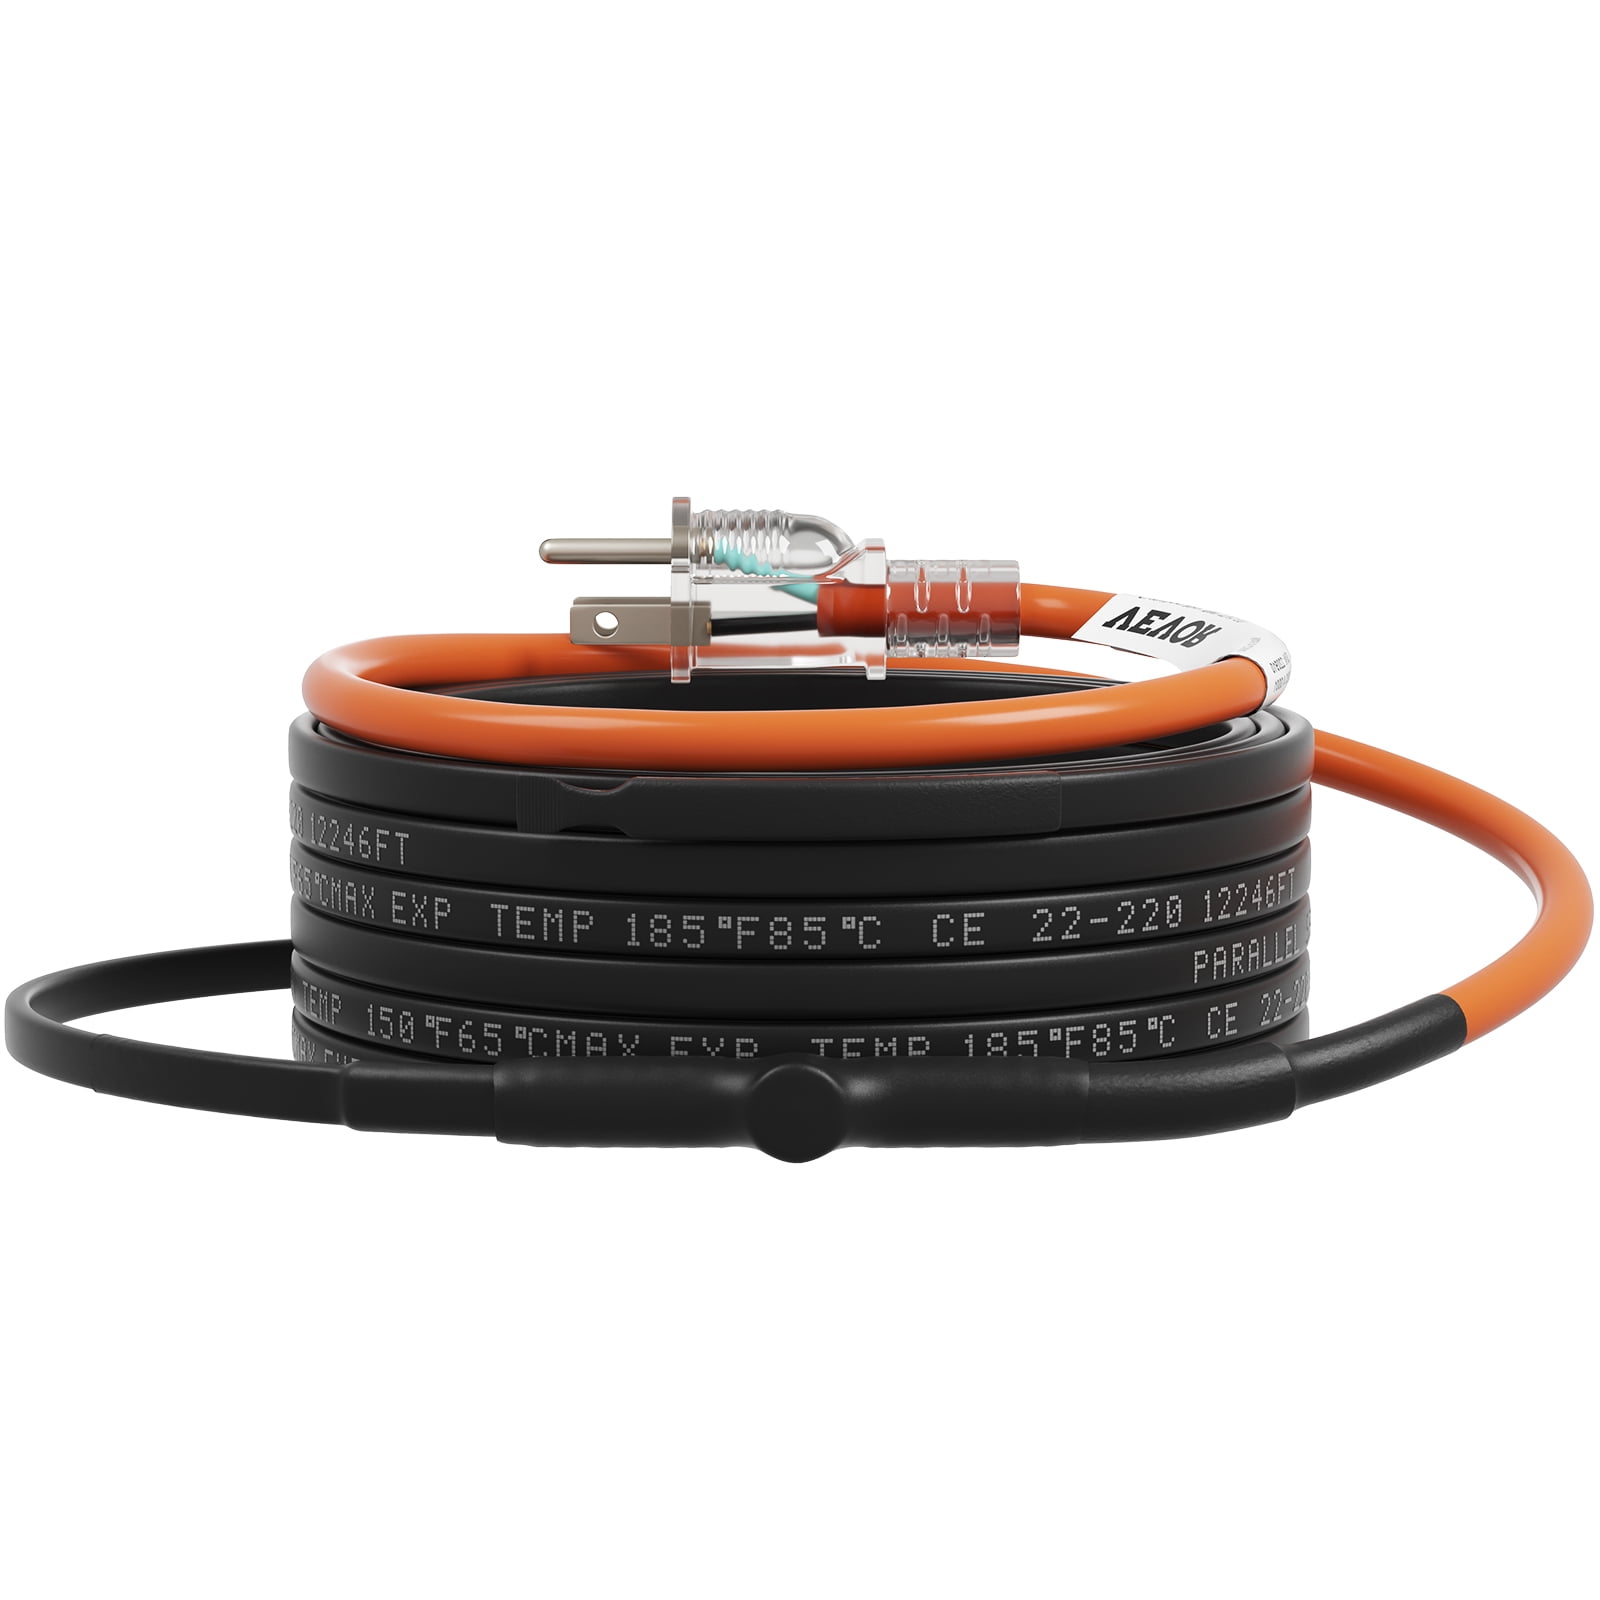 VEVOR Self-Regulating Pipe Heating Cable, 24-feet 5W/ft, 55% OFF